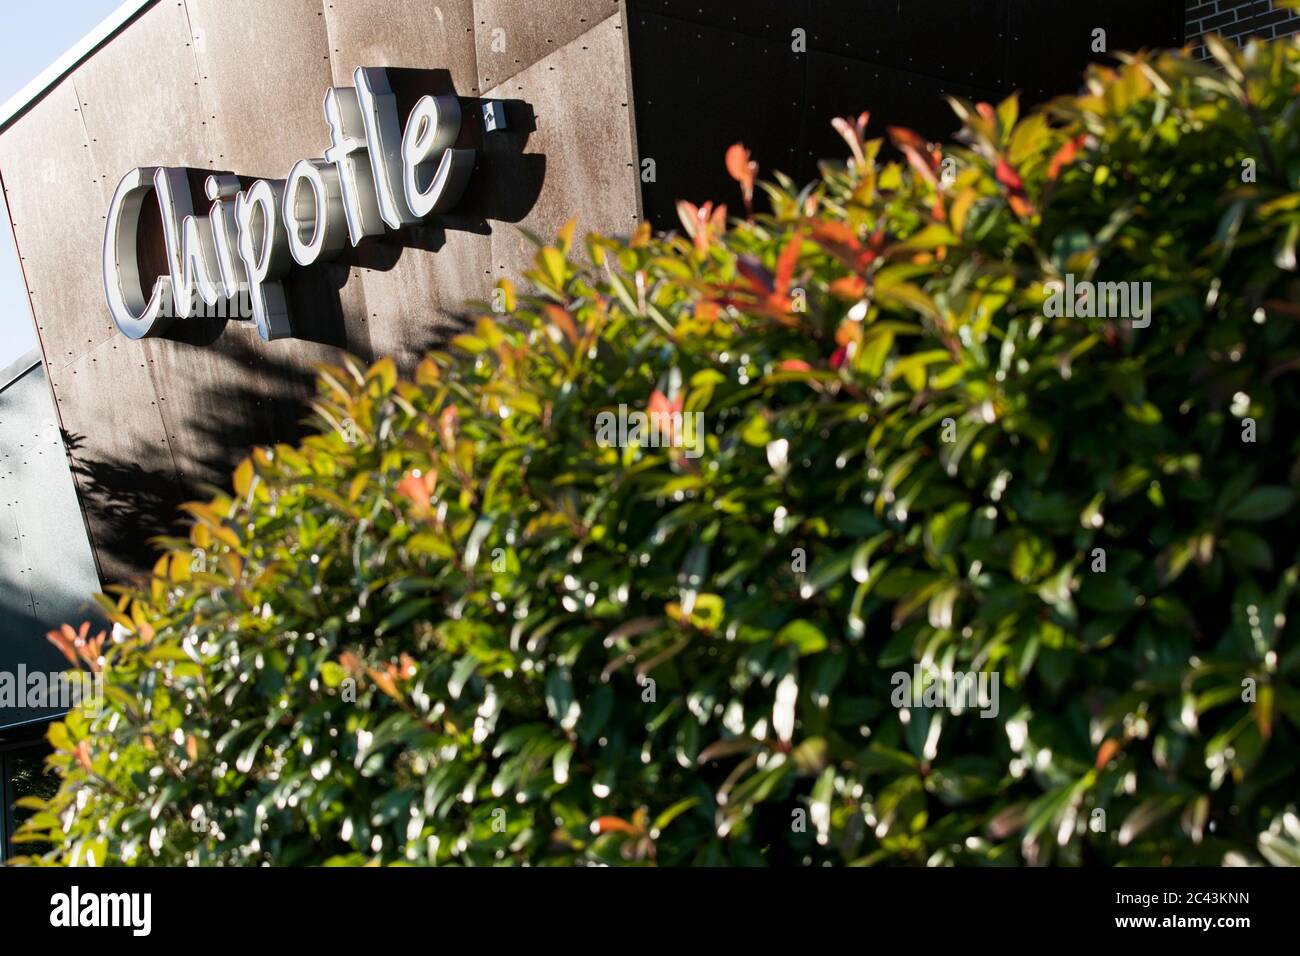 A logo sign outside of a Chipotle restaurant location in Bowie, Maryland on June 8, 2020. Stock Photo